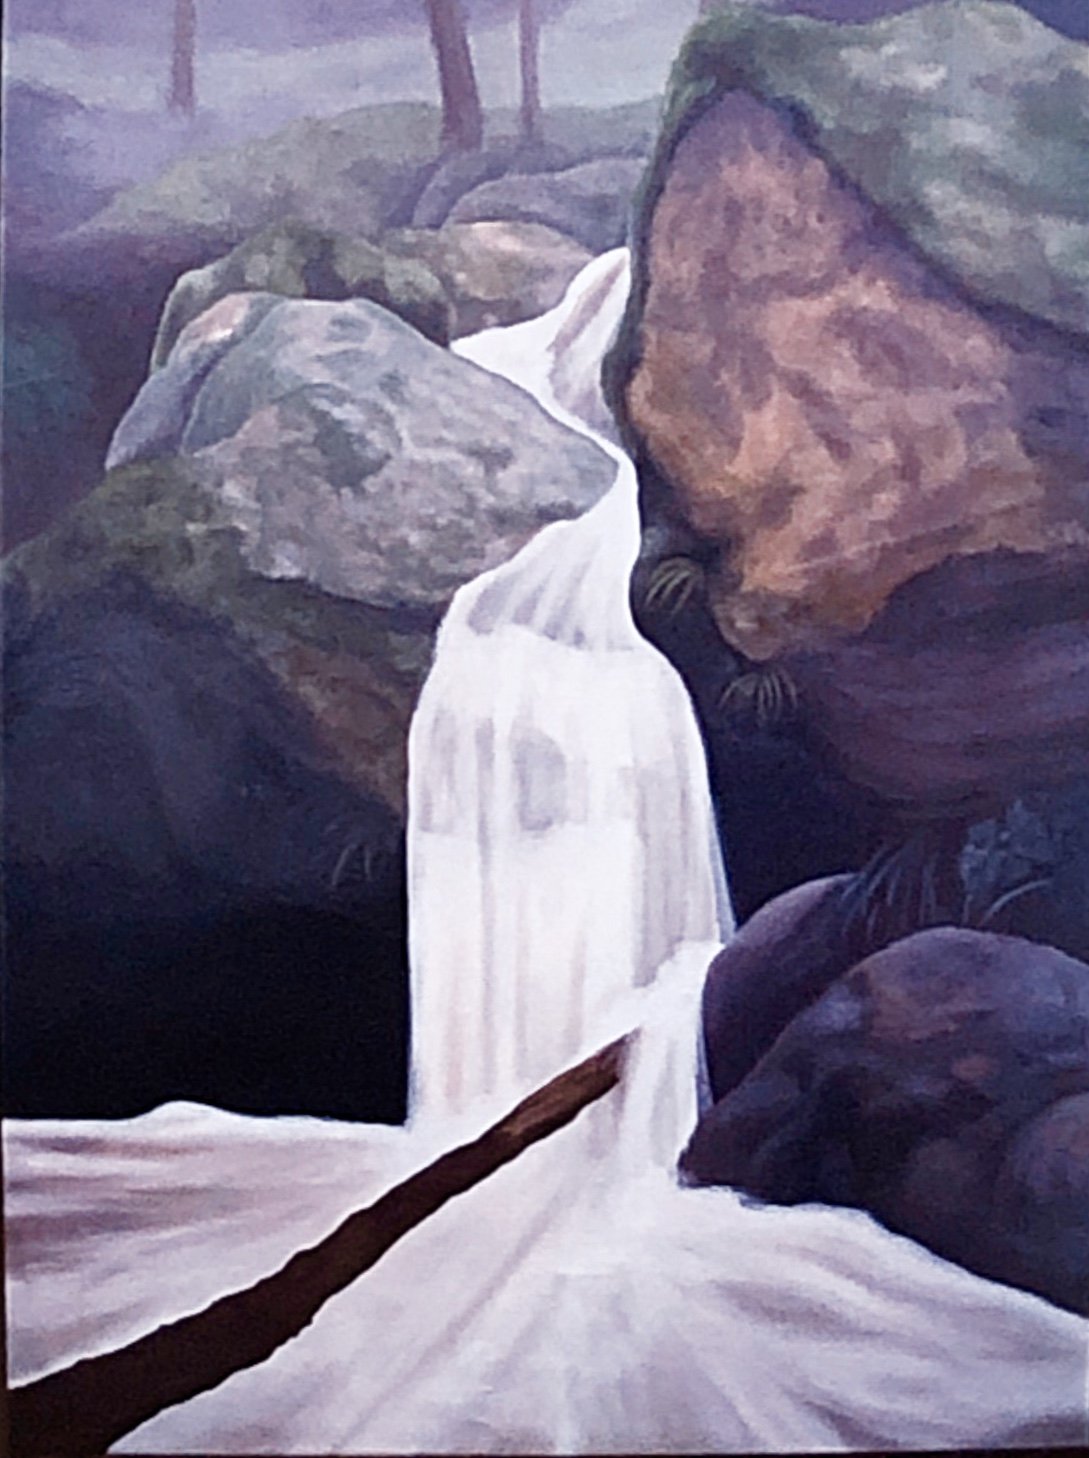 Waterfall, oil on linen, 42”x60”, private collection